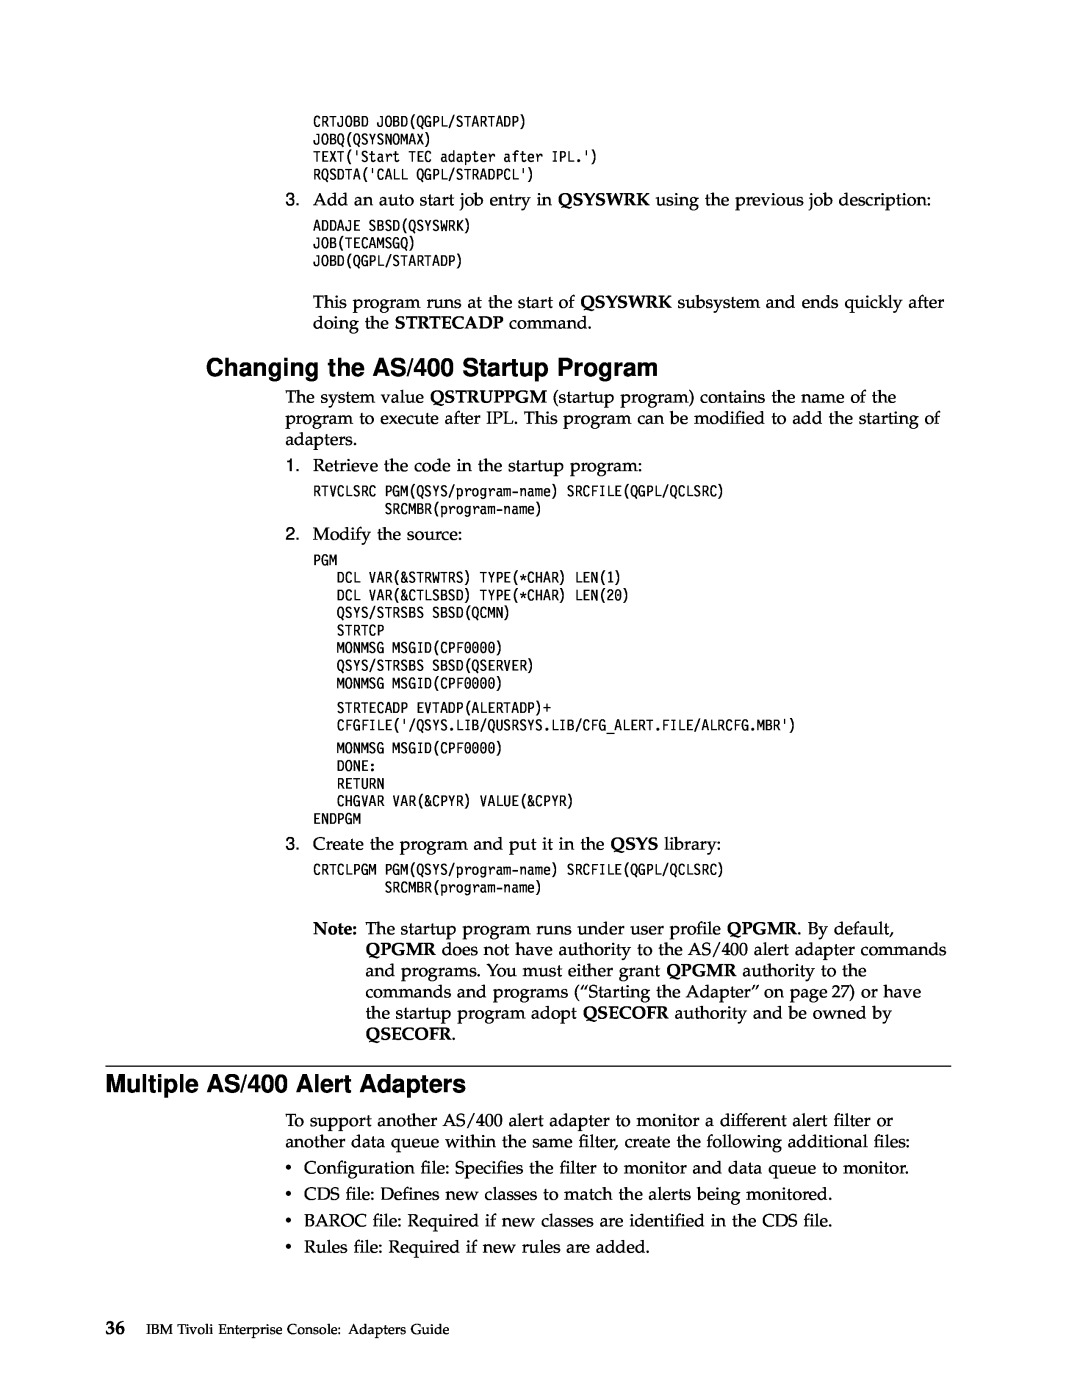 IBM Enterprise Console manual Changing the AS/400 Startup Program, Multiple AS/400 Alert Adapters, Qsecofr 